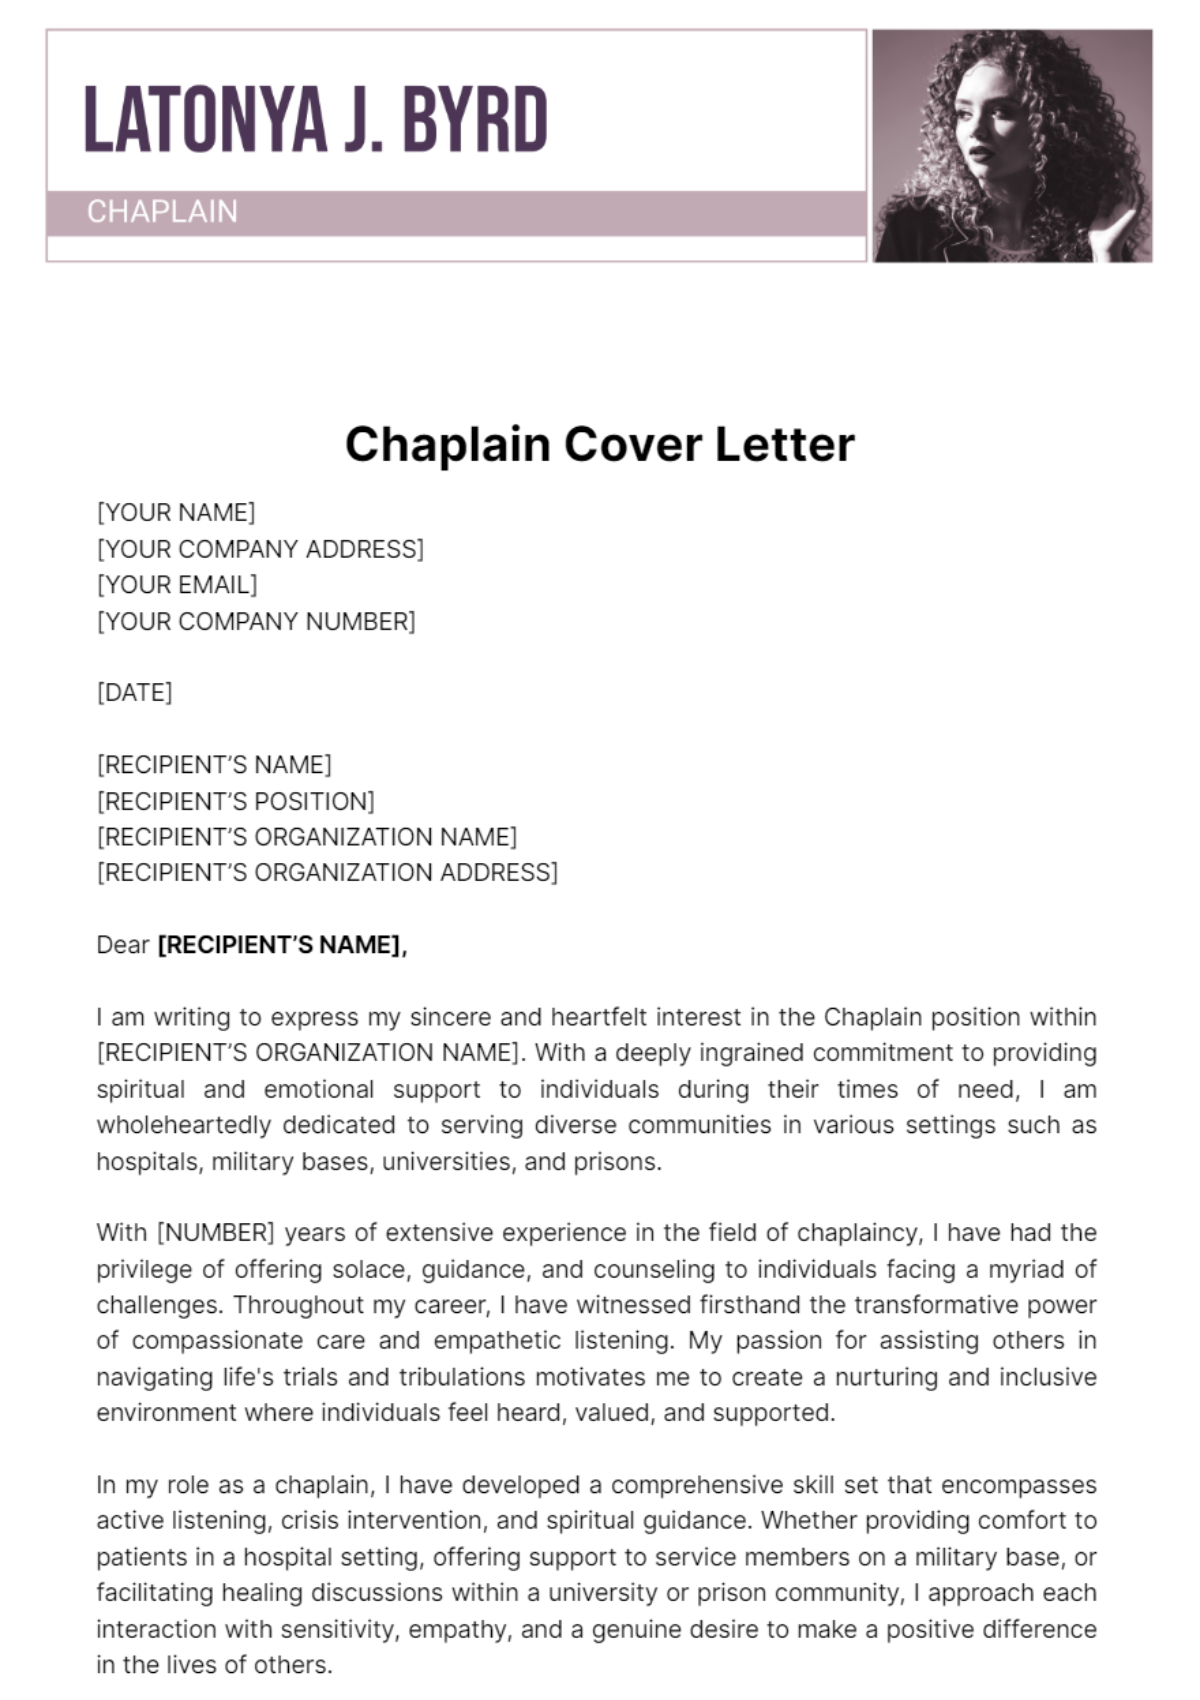 Chaplain Cover Letter Template